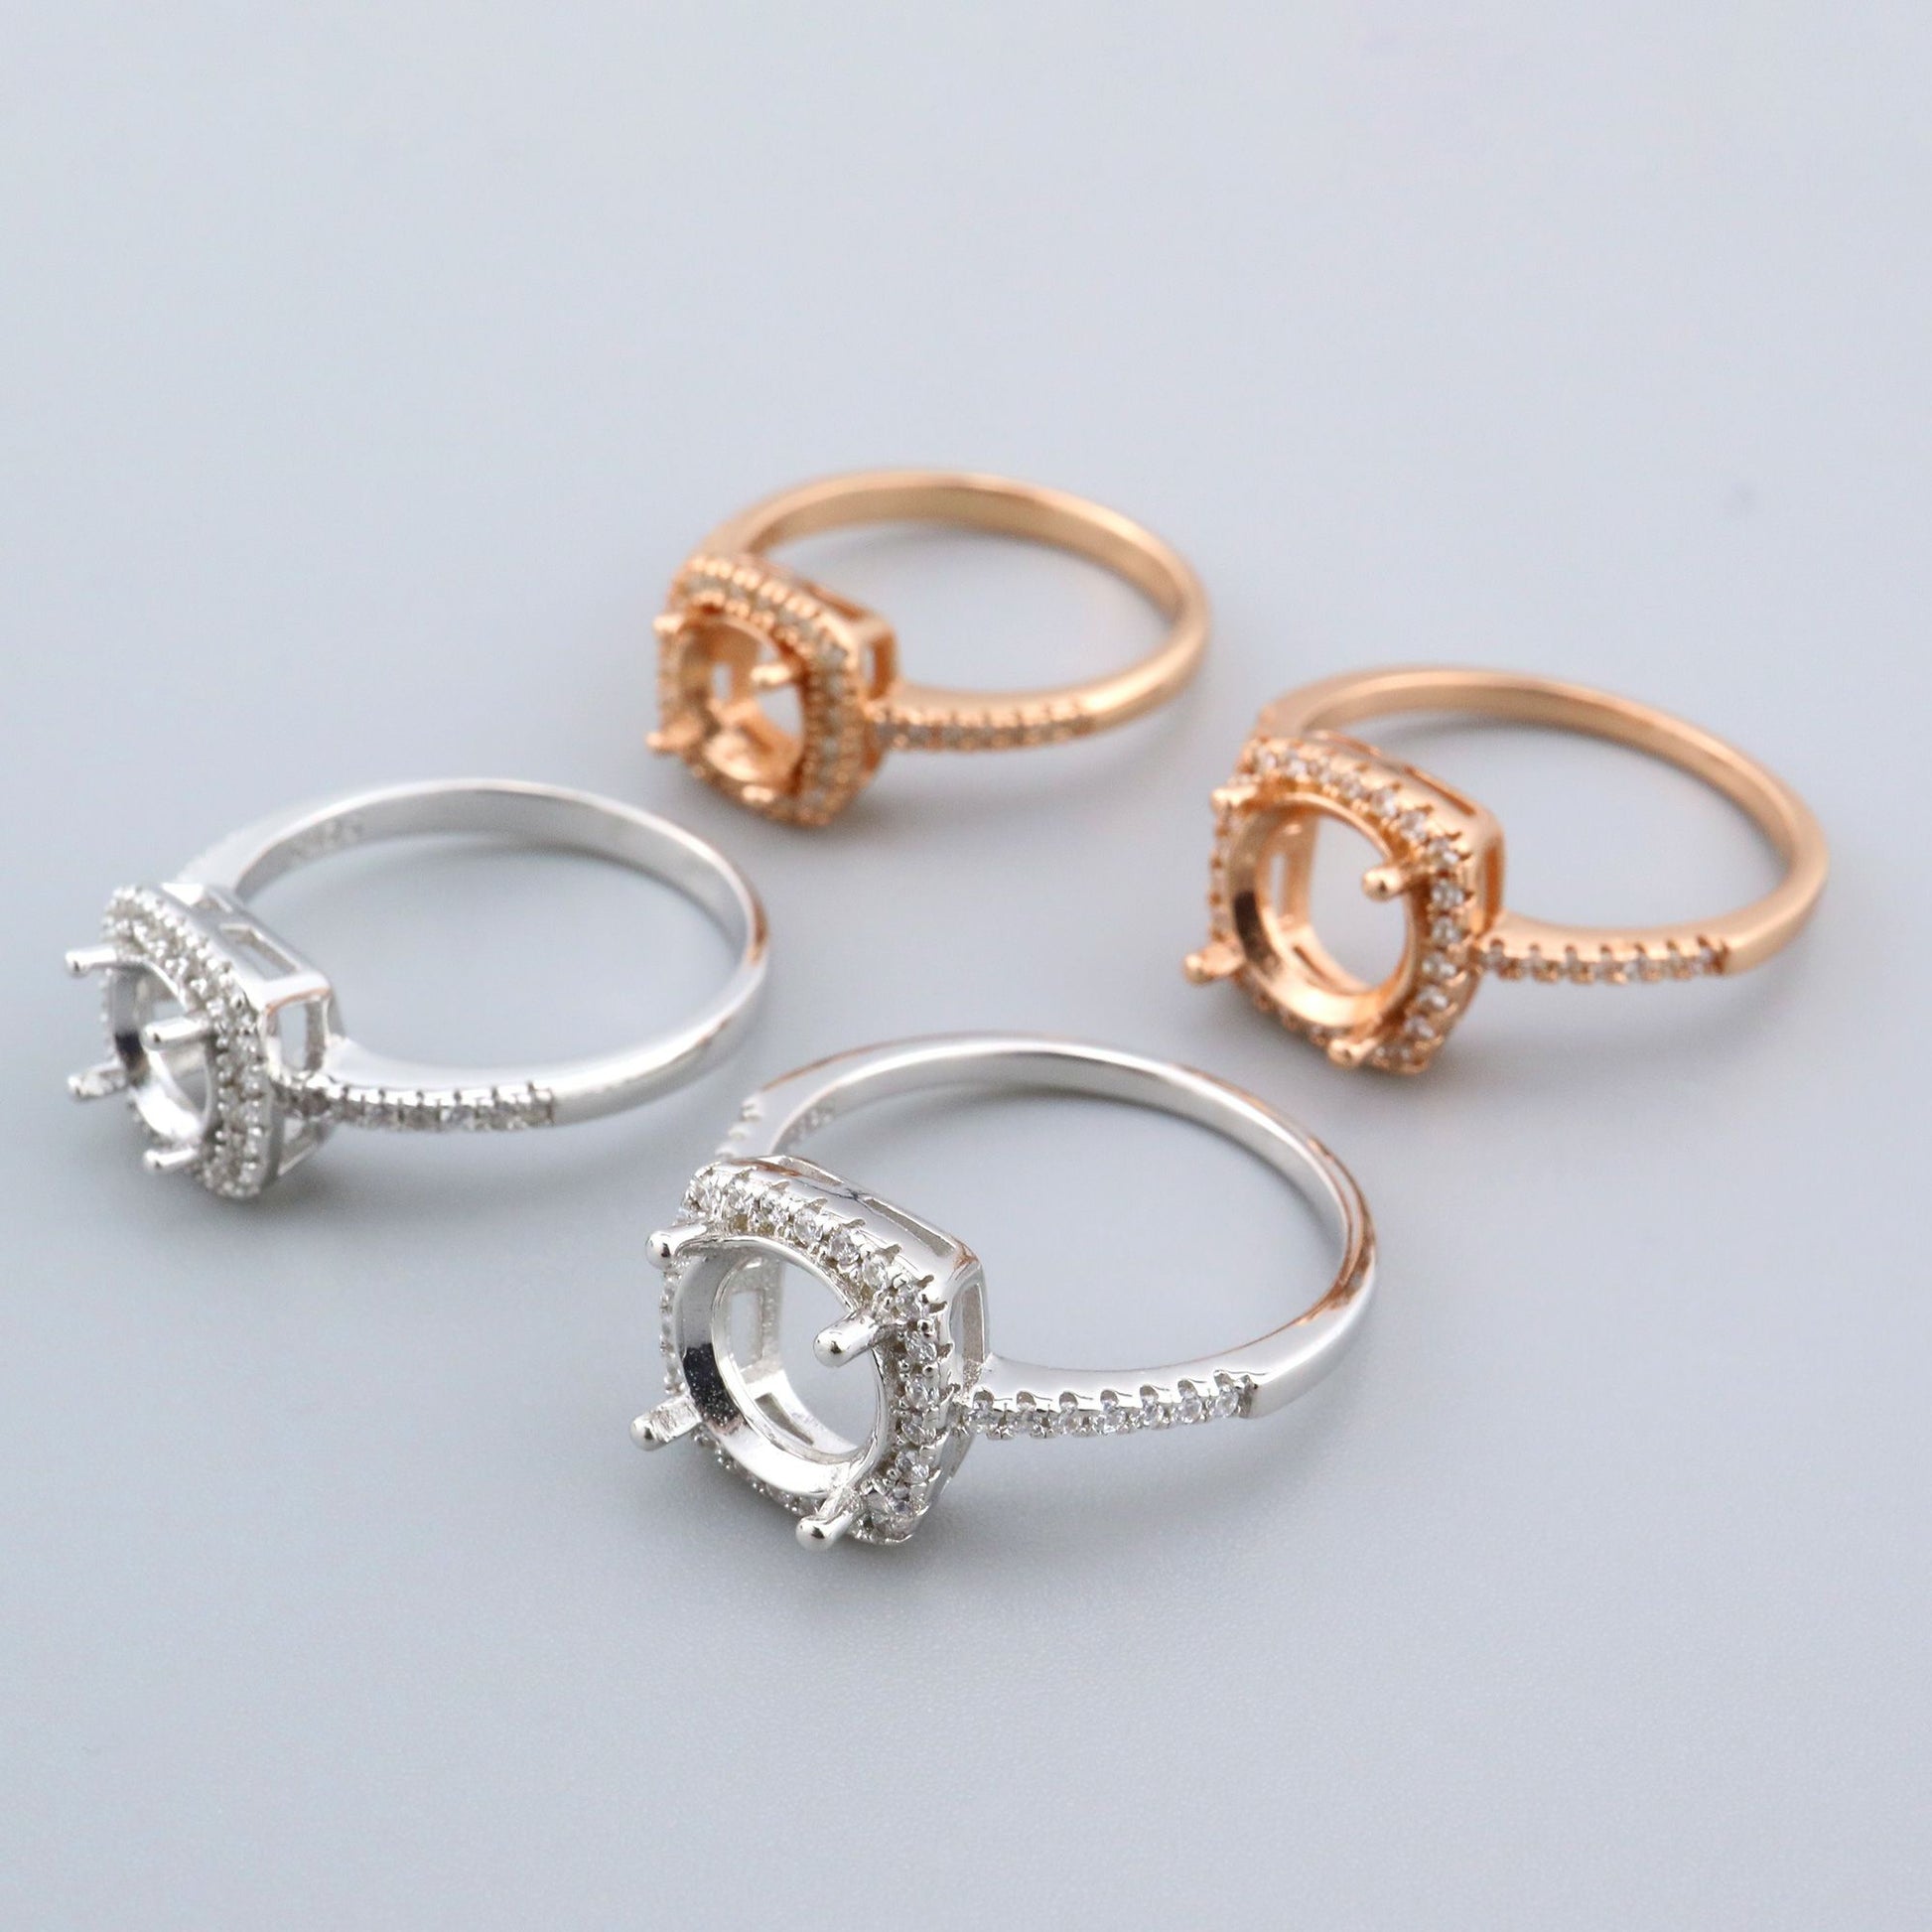 2 silver and 2 rose gold semi mounts for a round gem with a slightly squared halo.